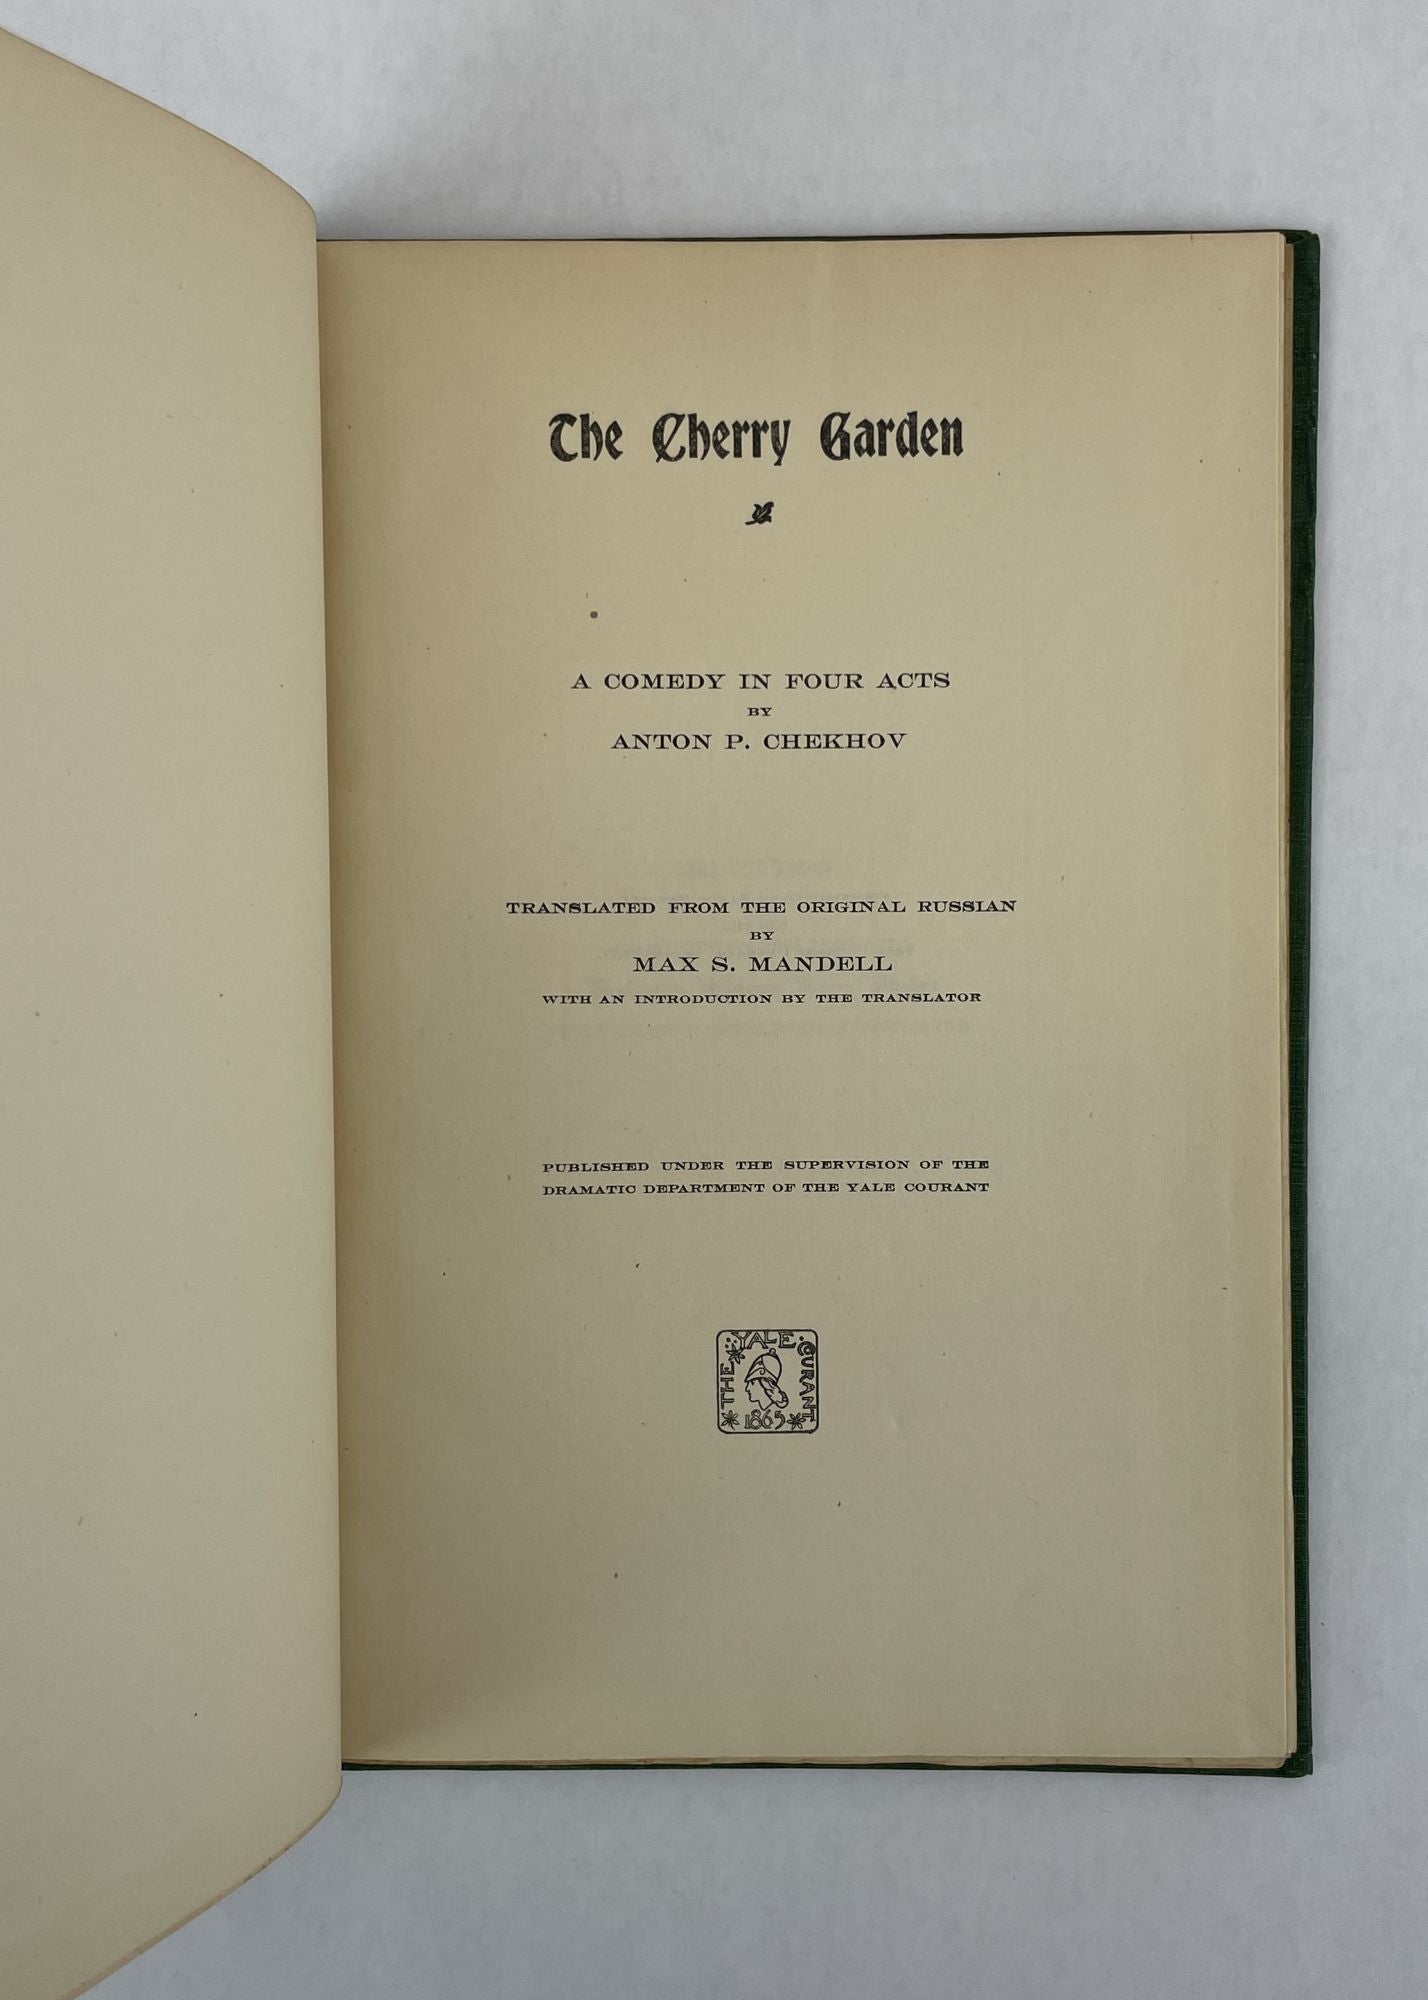 Product Image for THE CHERRY GARDEN